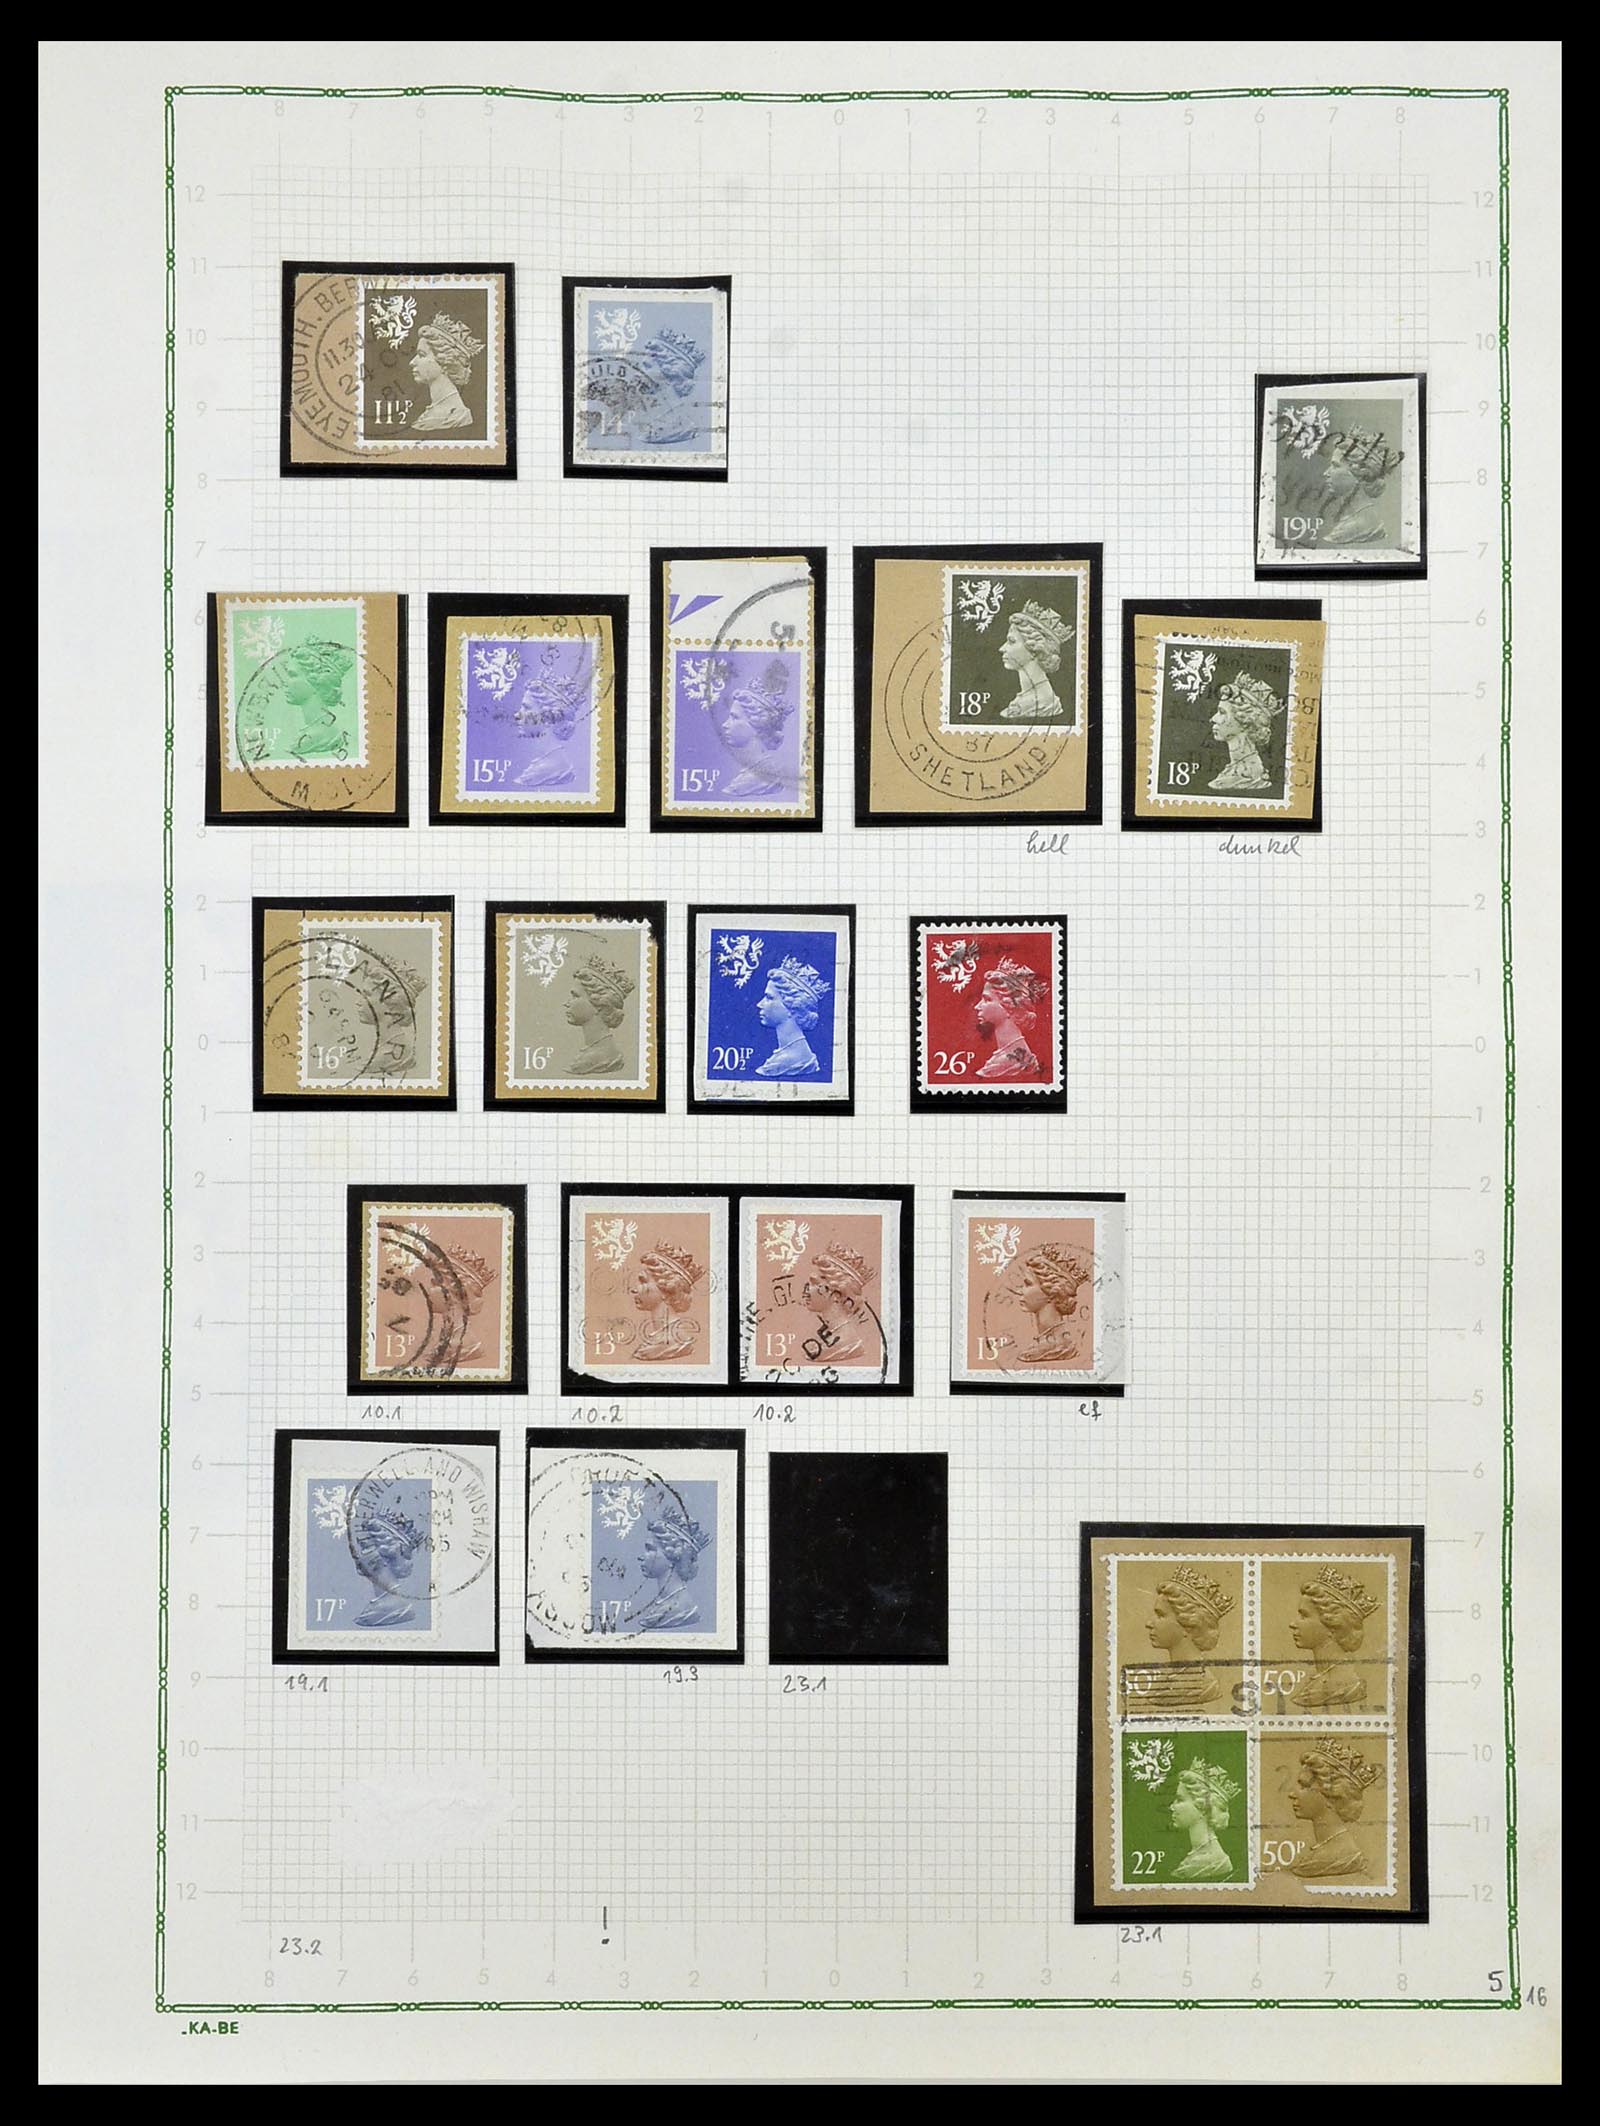 34221 027 - Stamp collection 34221 Great Britain Machins/castles 1971-2005.